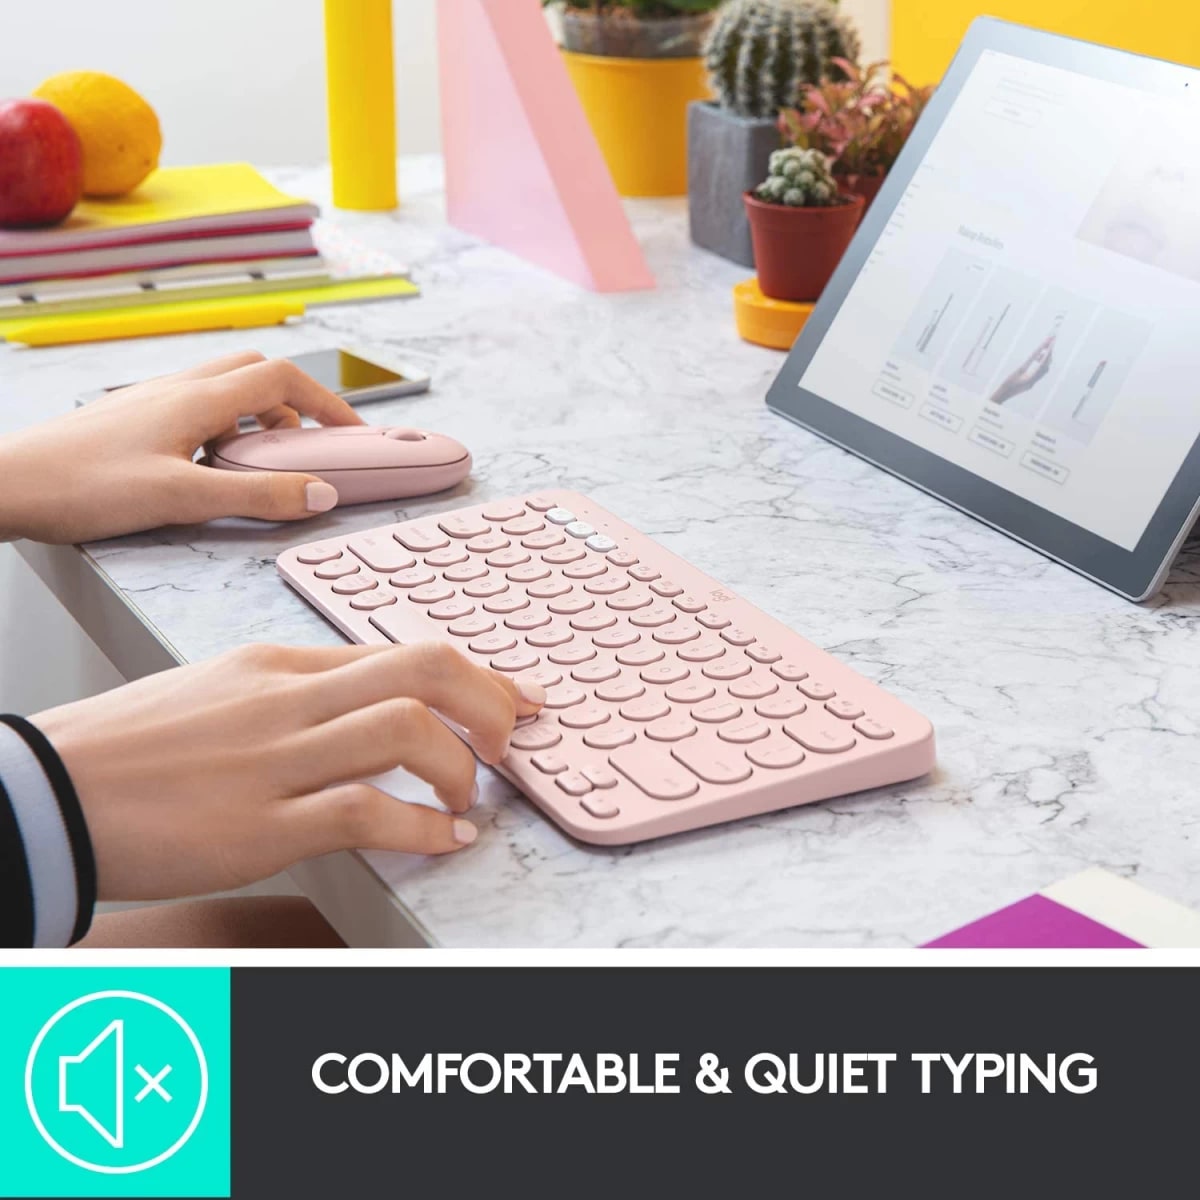 Logitech K380 Multi-Device Bluetooth Keyboard up to 3 Devices